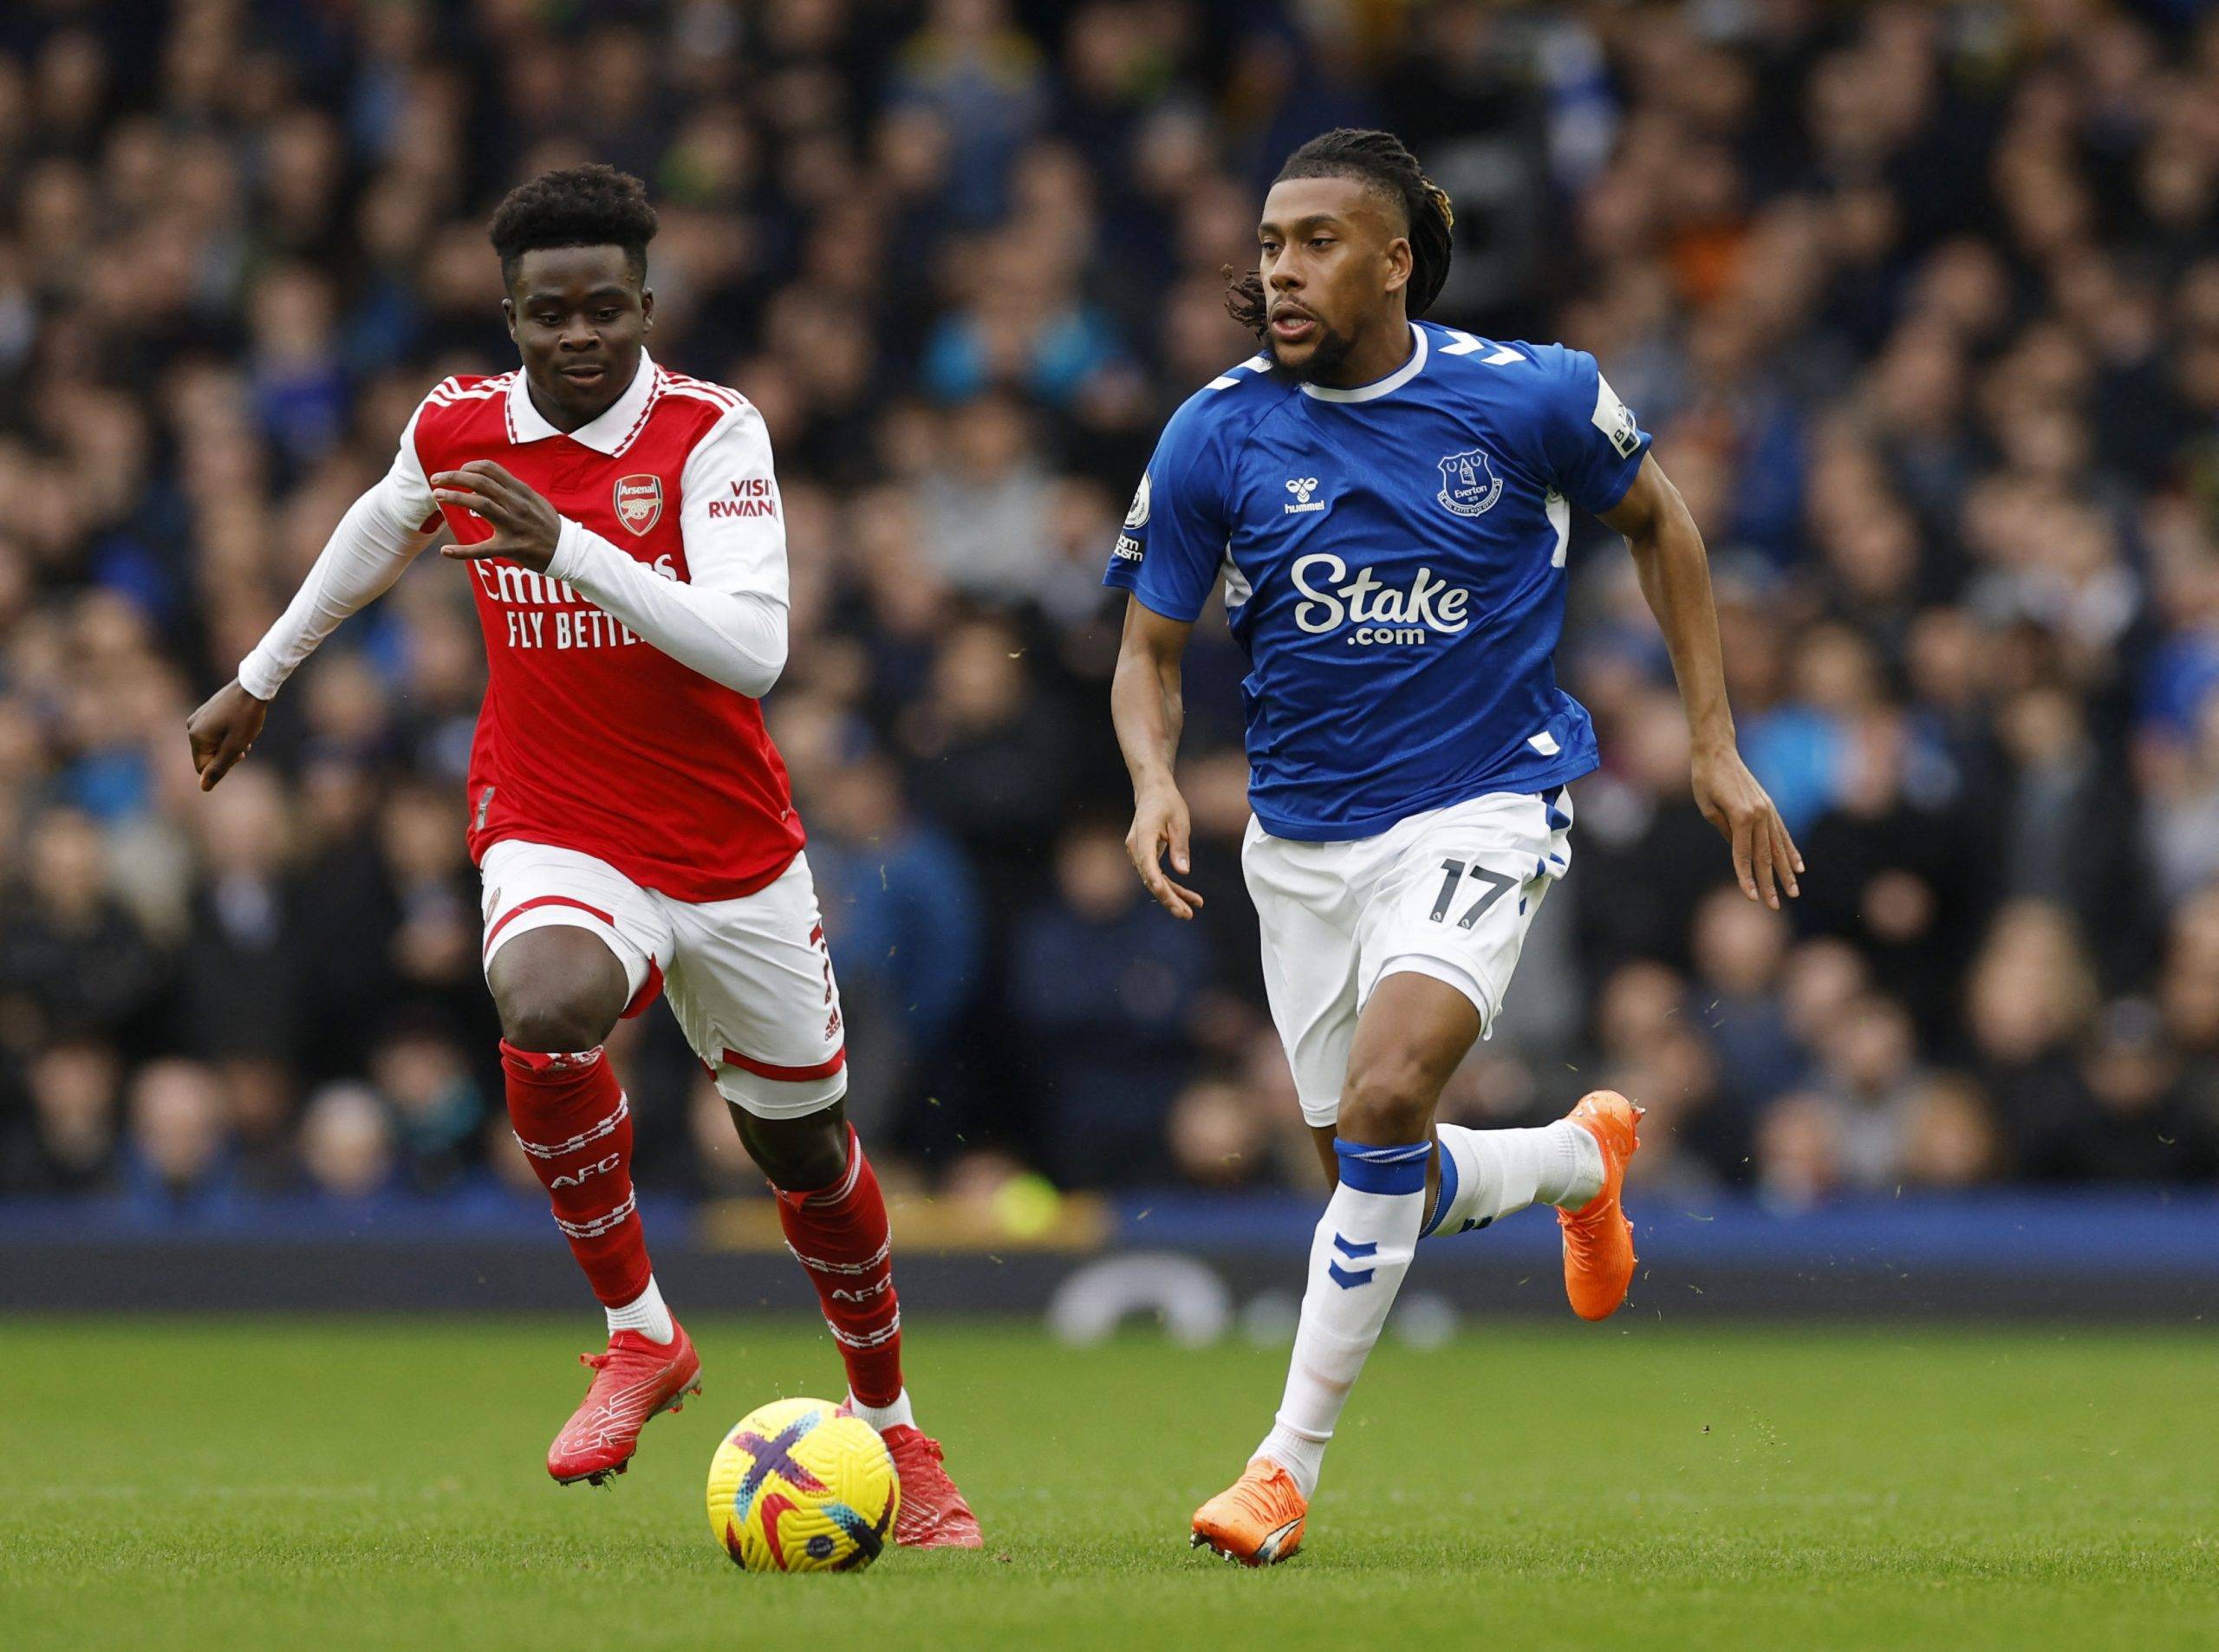 Everton have offered new deal to Alex Iwobi - Everton News